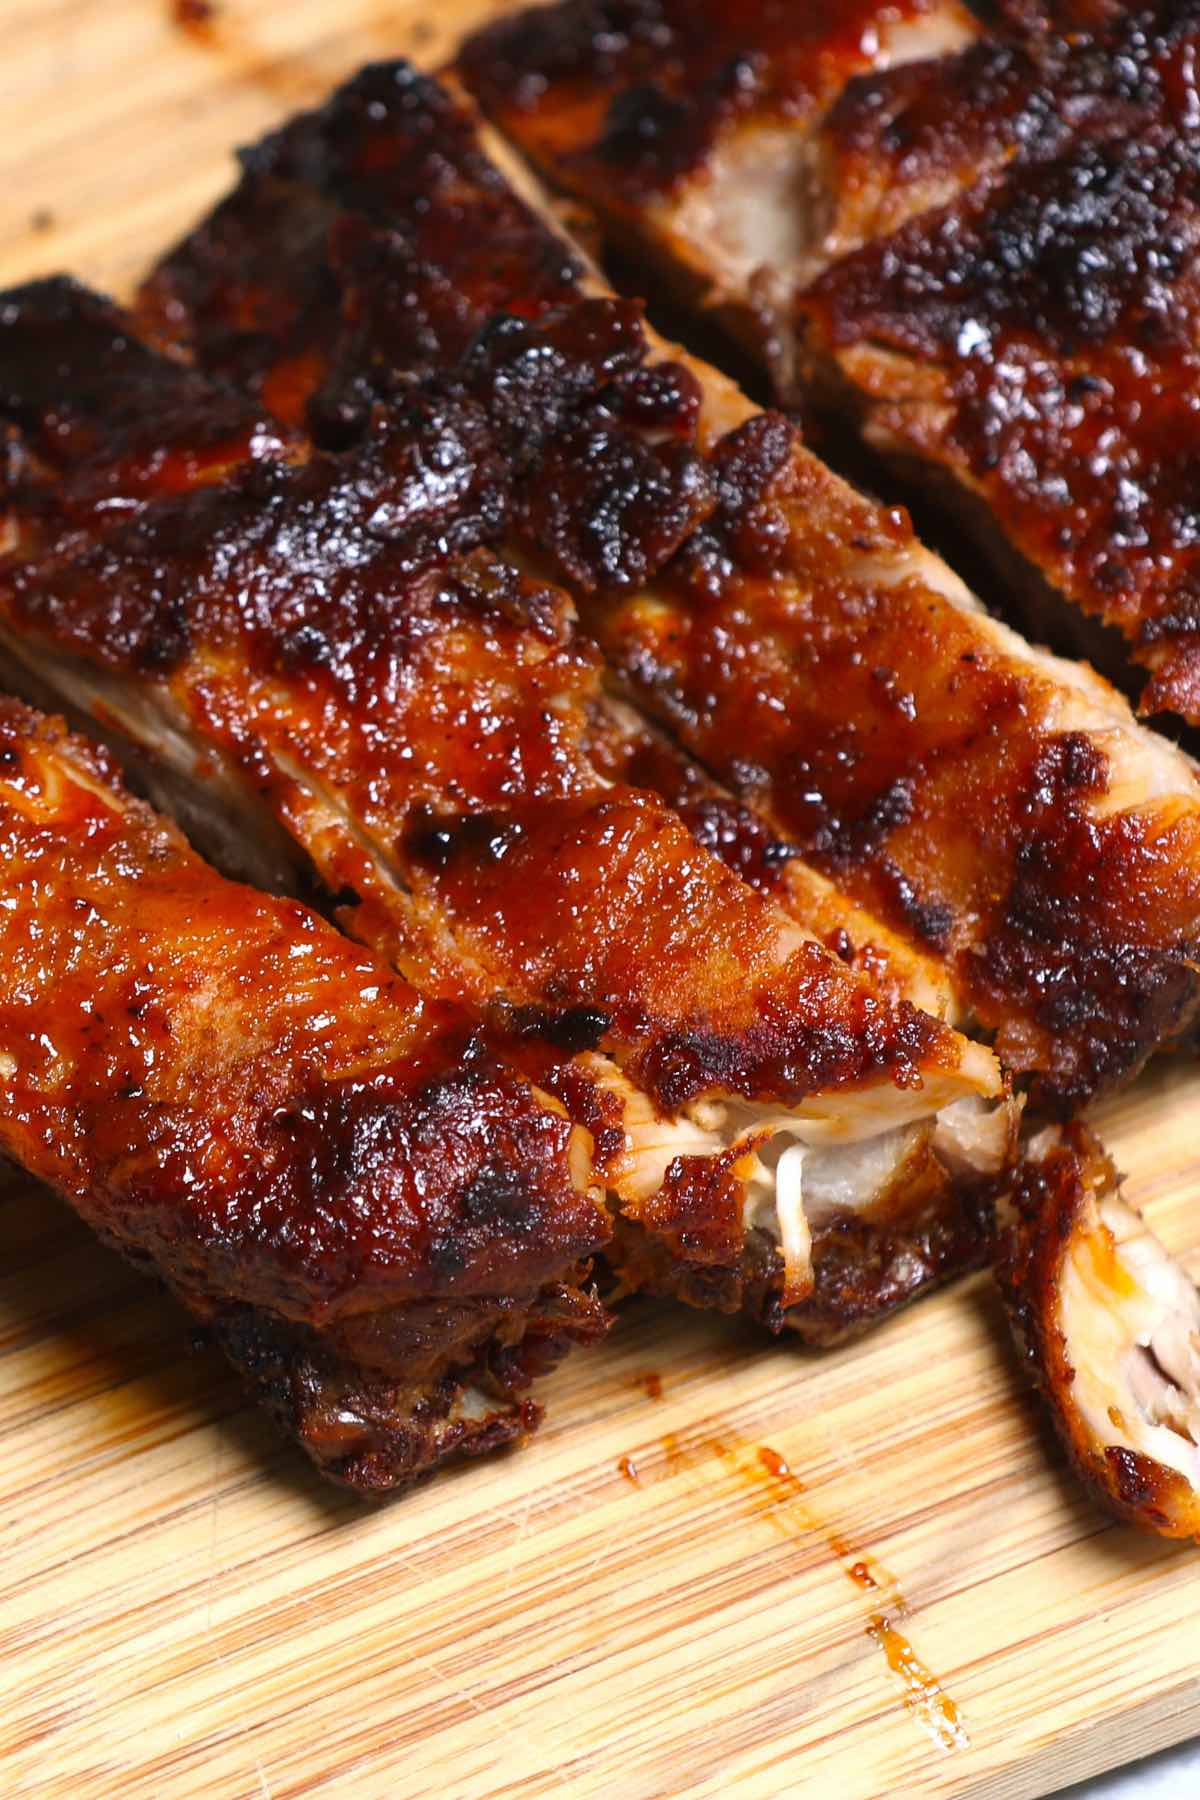 With bold barbeque flavor and tender, fall-off-the-bone meat, this is the ribs recipe of your dreams! There’s no need to have a grill or any special cooking equipment because they’re baked right in the oven. Now you can have restaurant-quality BBQ Pork Loin Back Ribs at home, made just the way you like them.